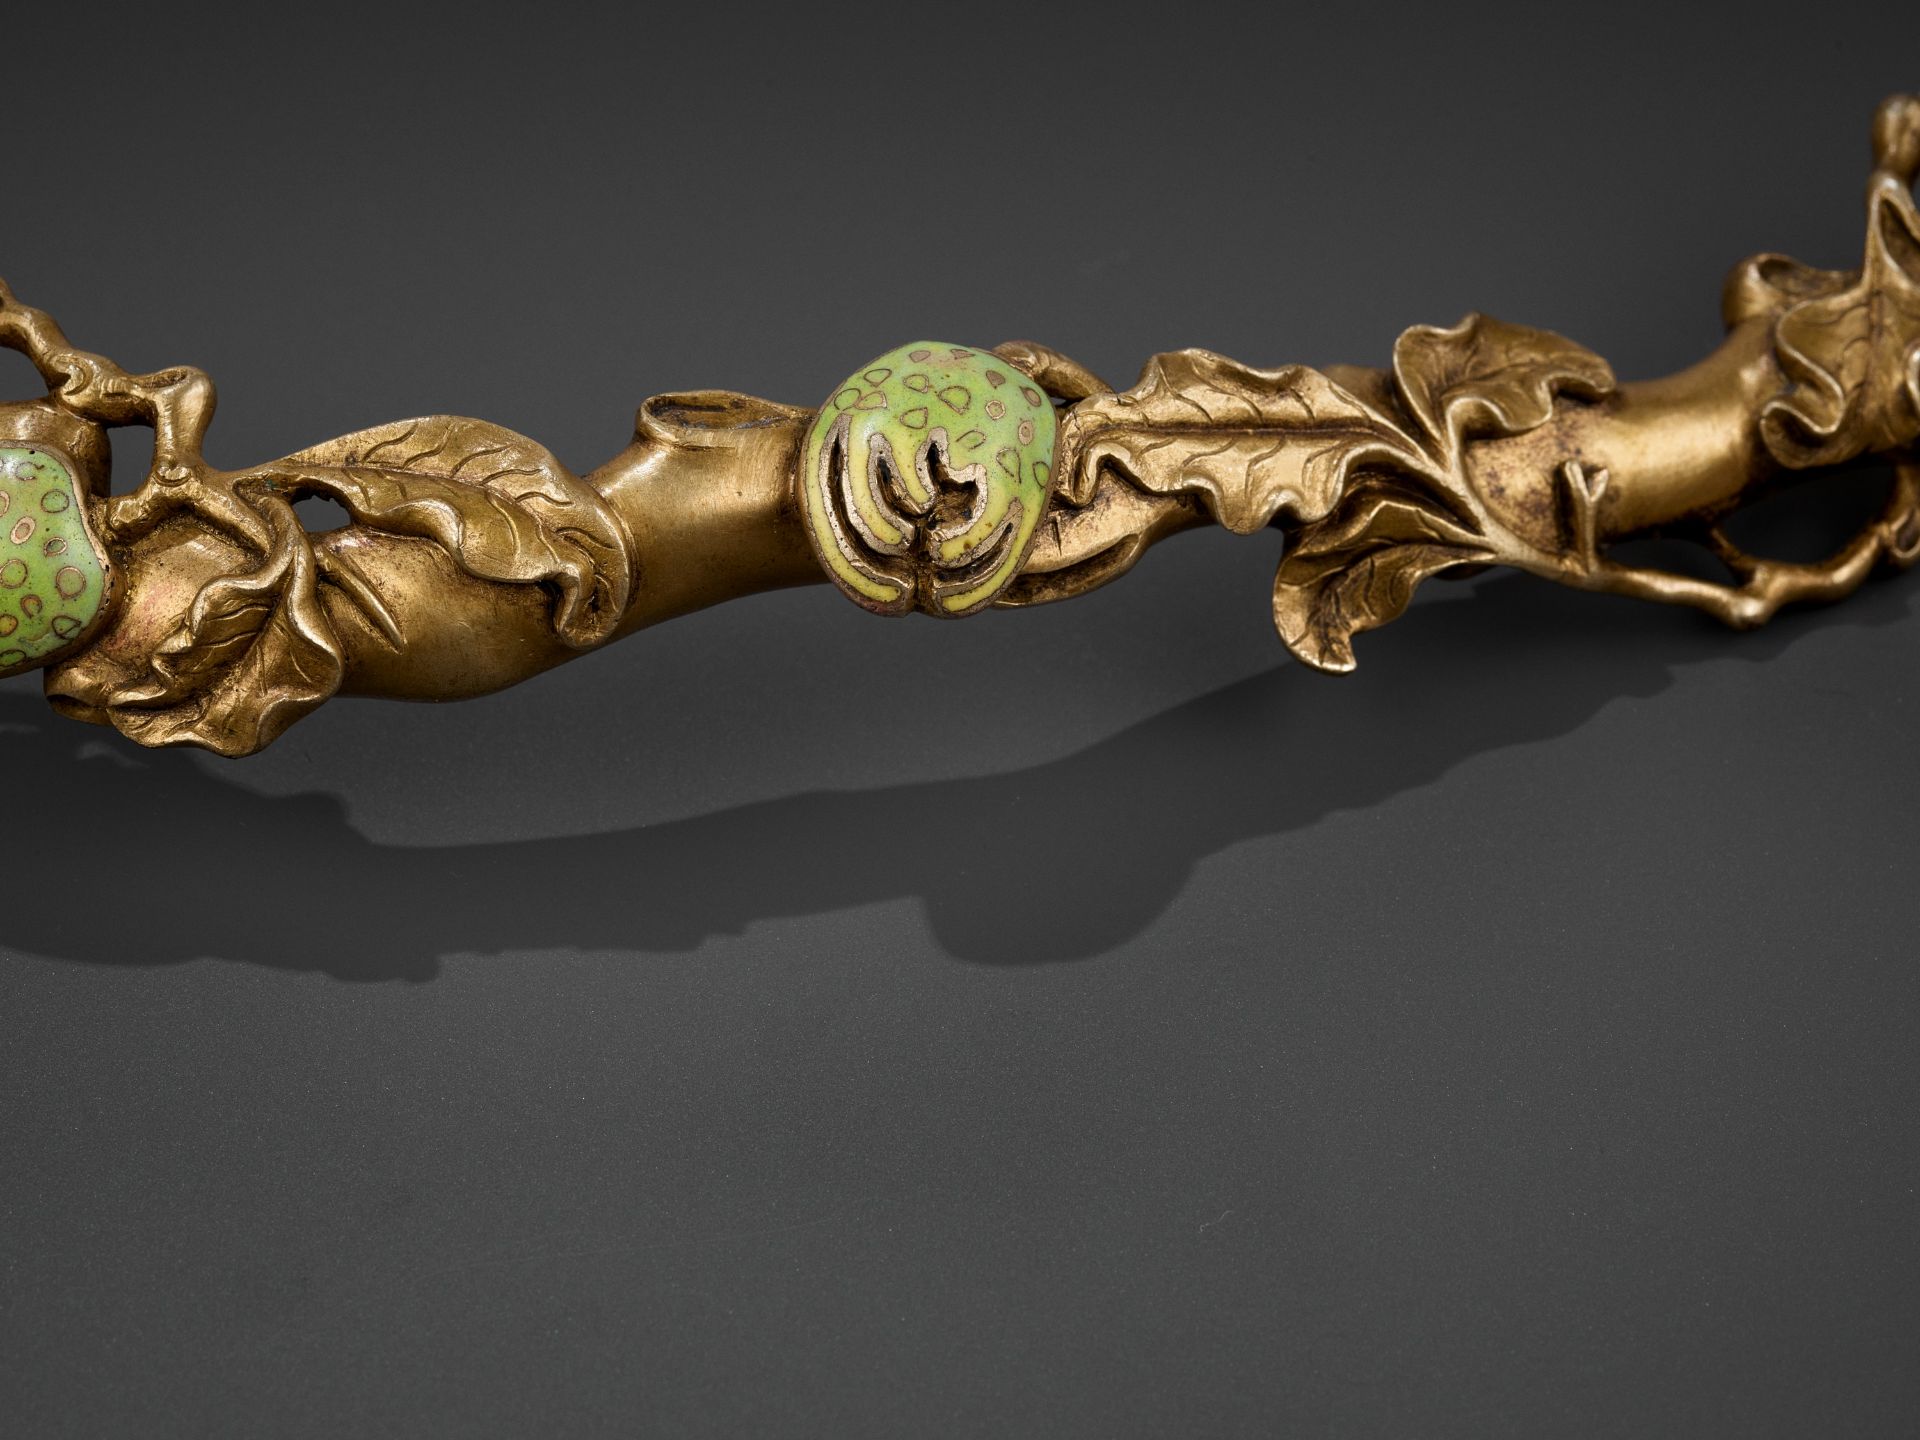 A CHAMPLEVE ENAMEL 'BUDDHA'S HAND' RUYI SCEPTER, QING DYNASTY - Image 2 of 11